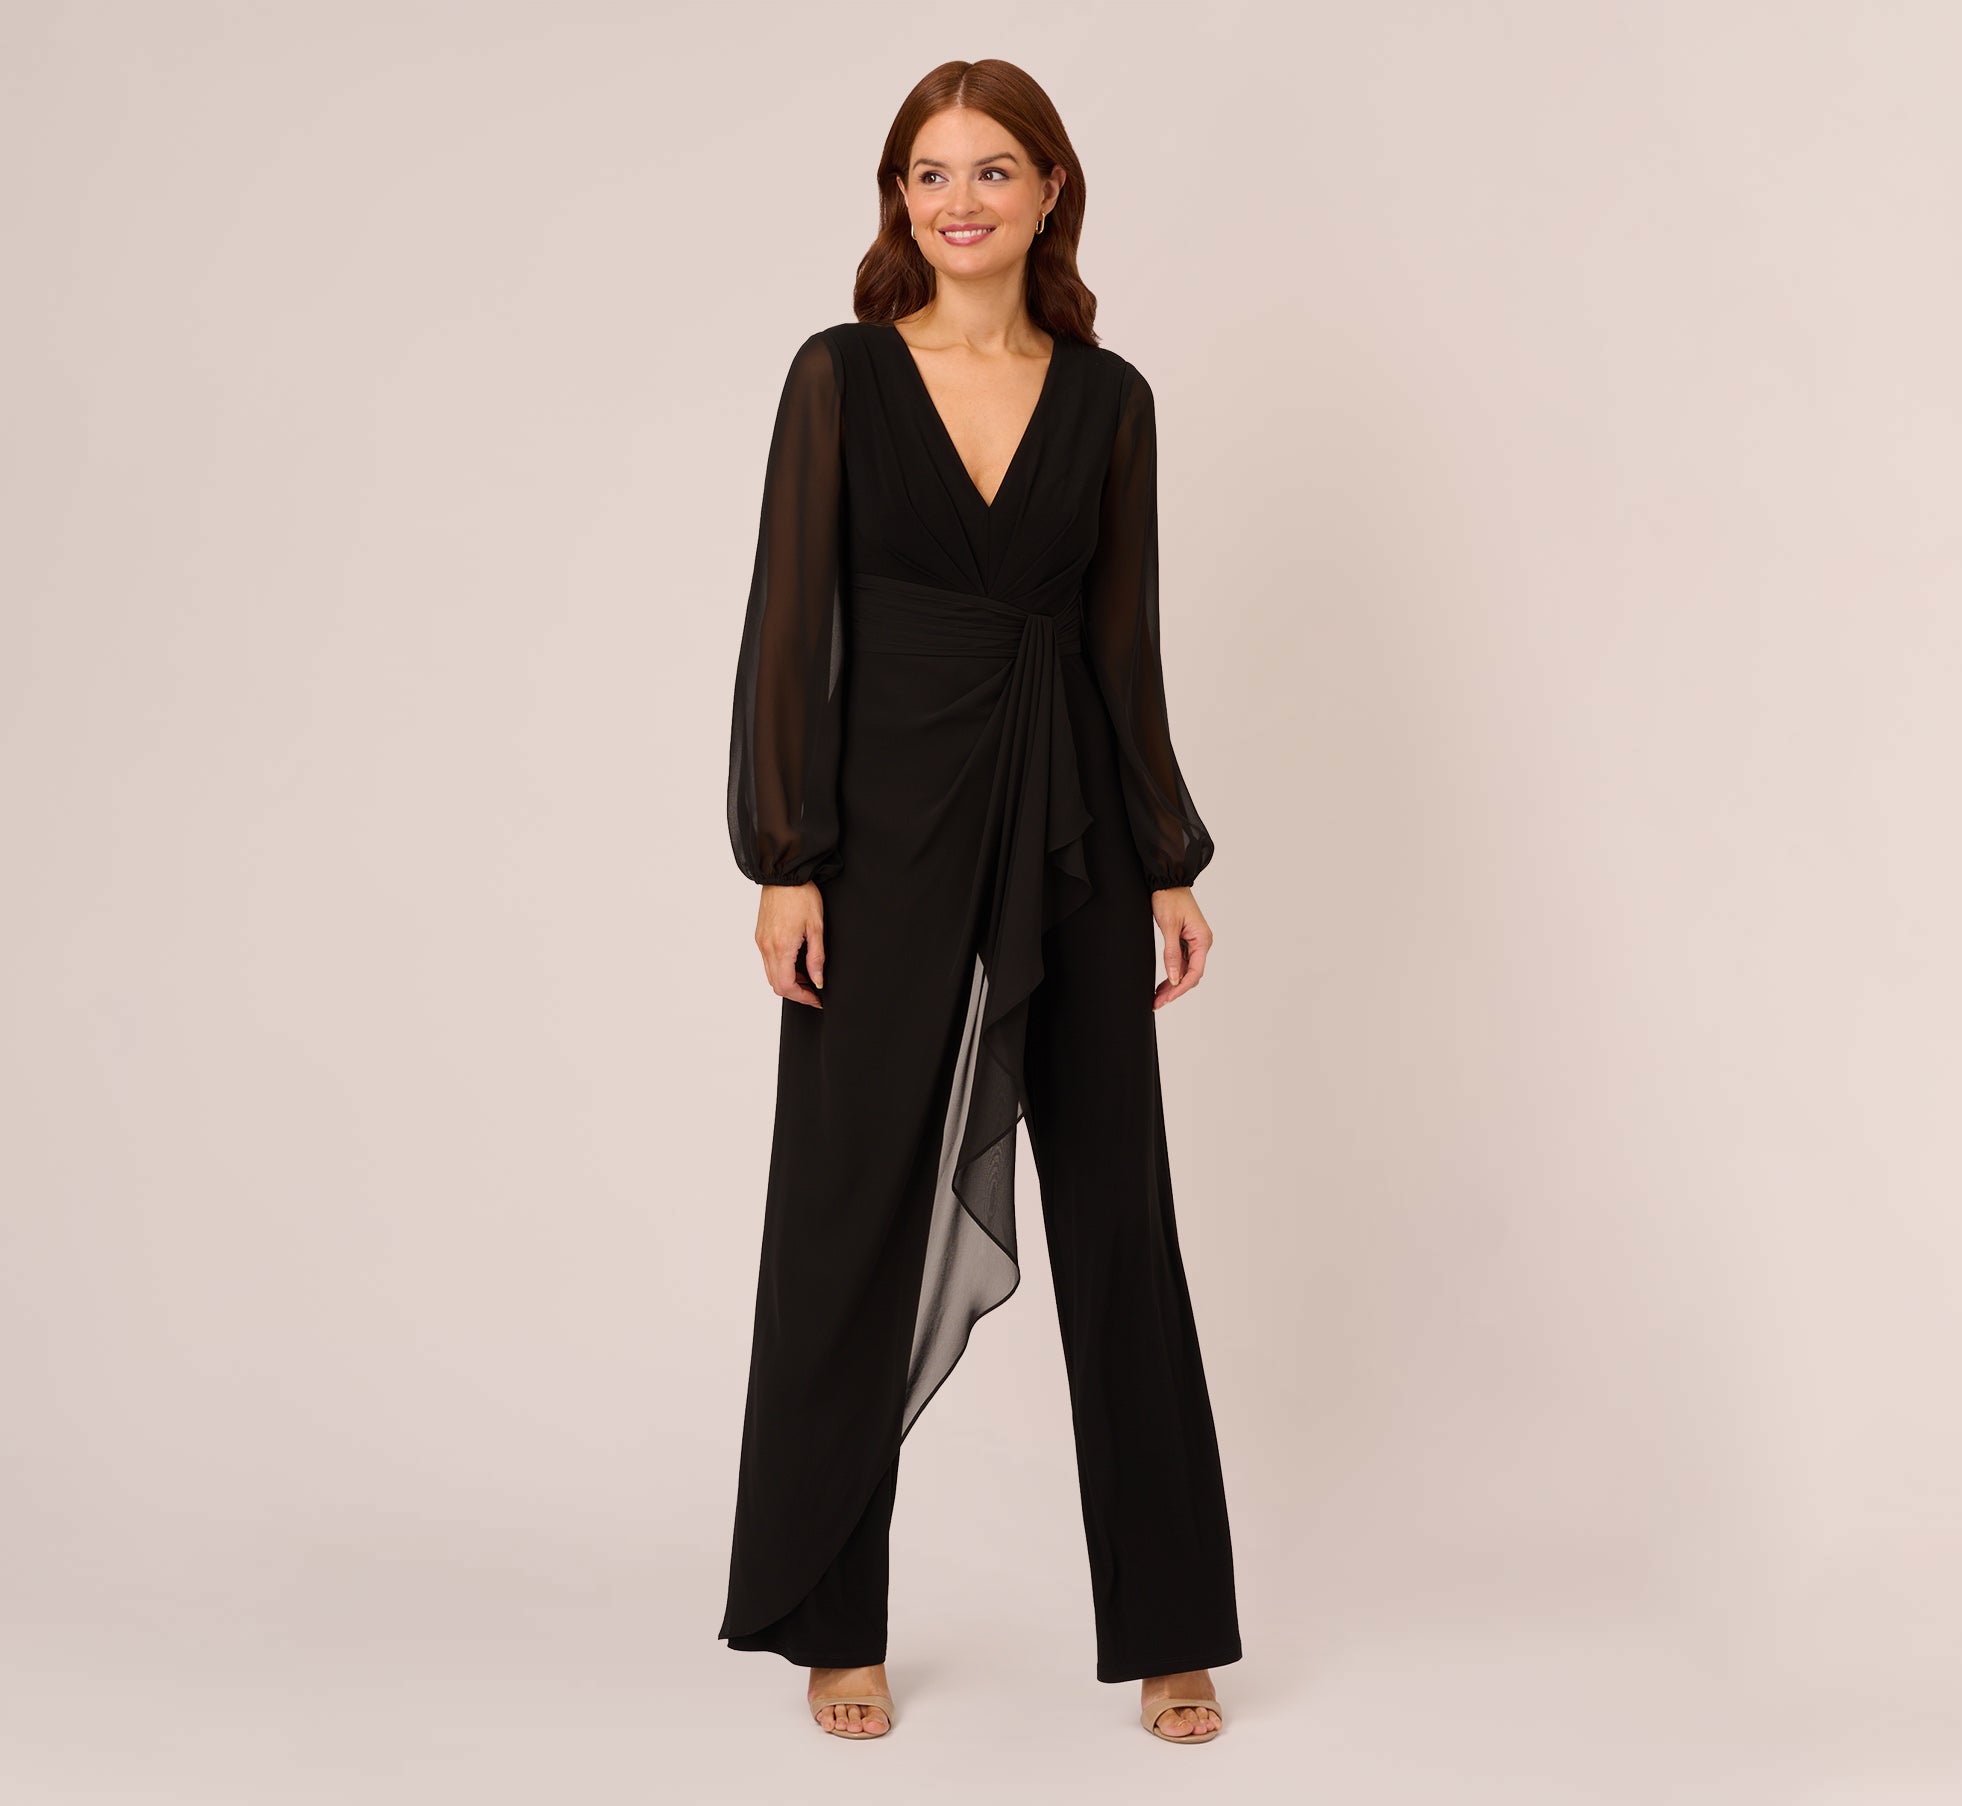 Citi Trends - Ladies! Jumpsuits are the Hot look and at... | Facebook